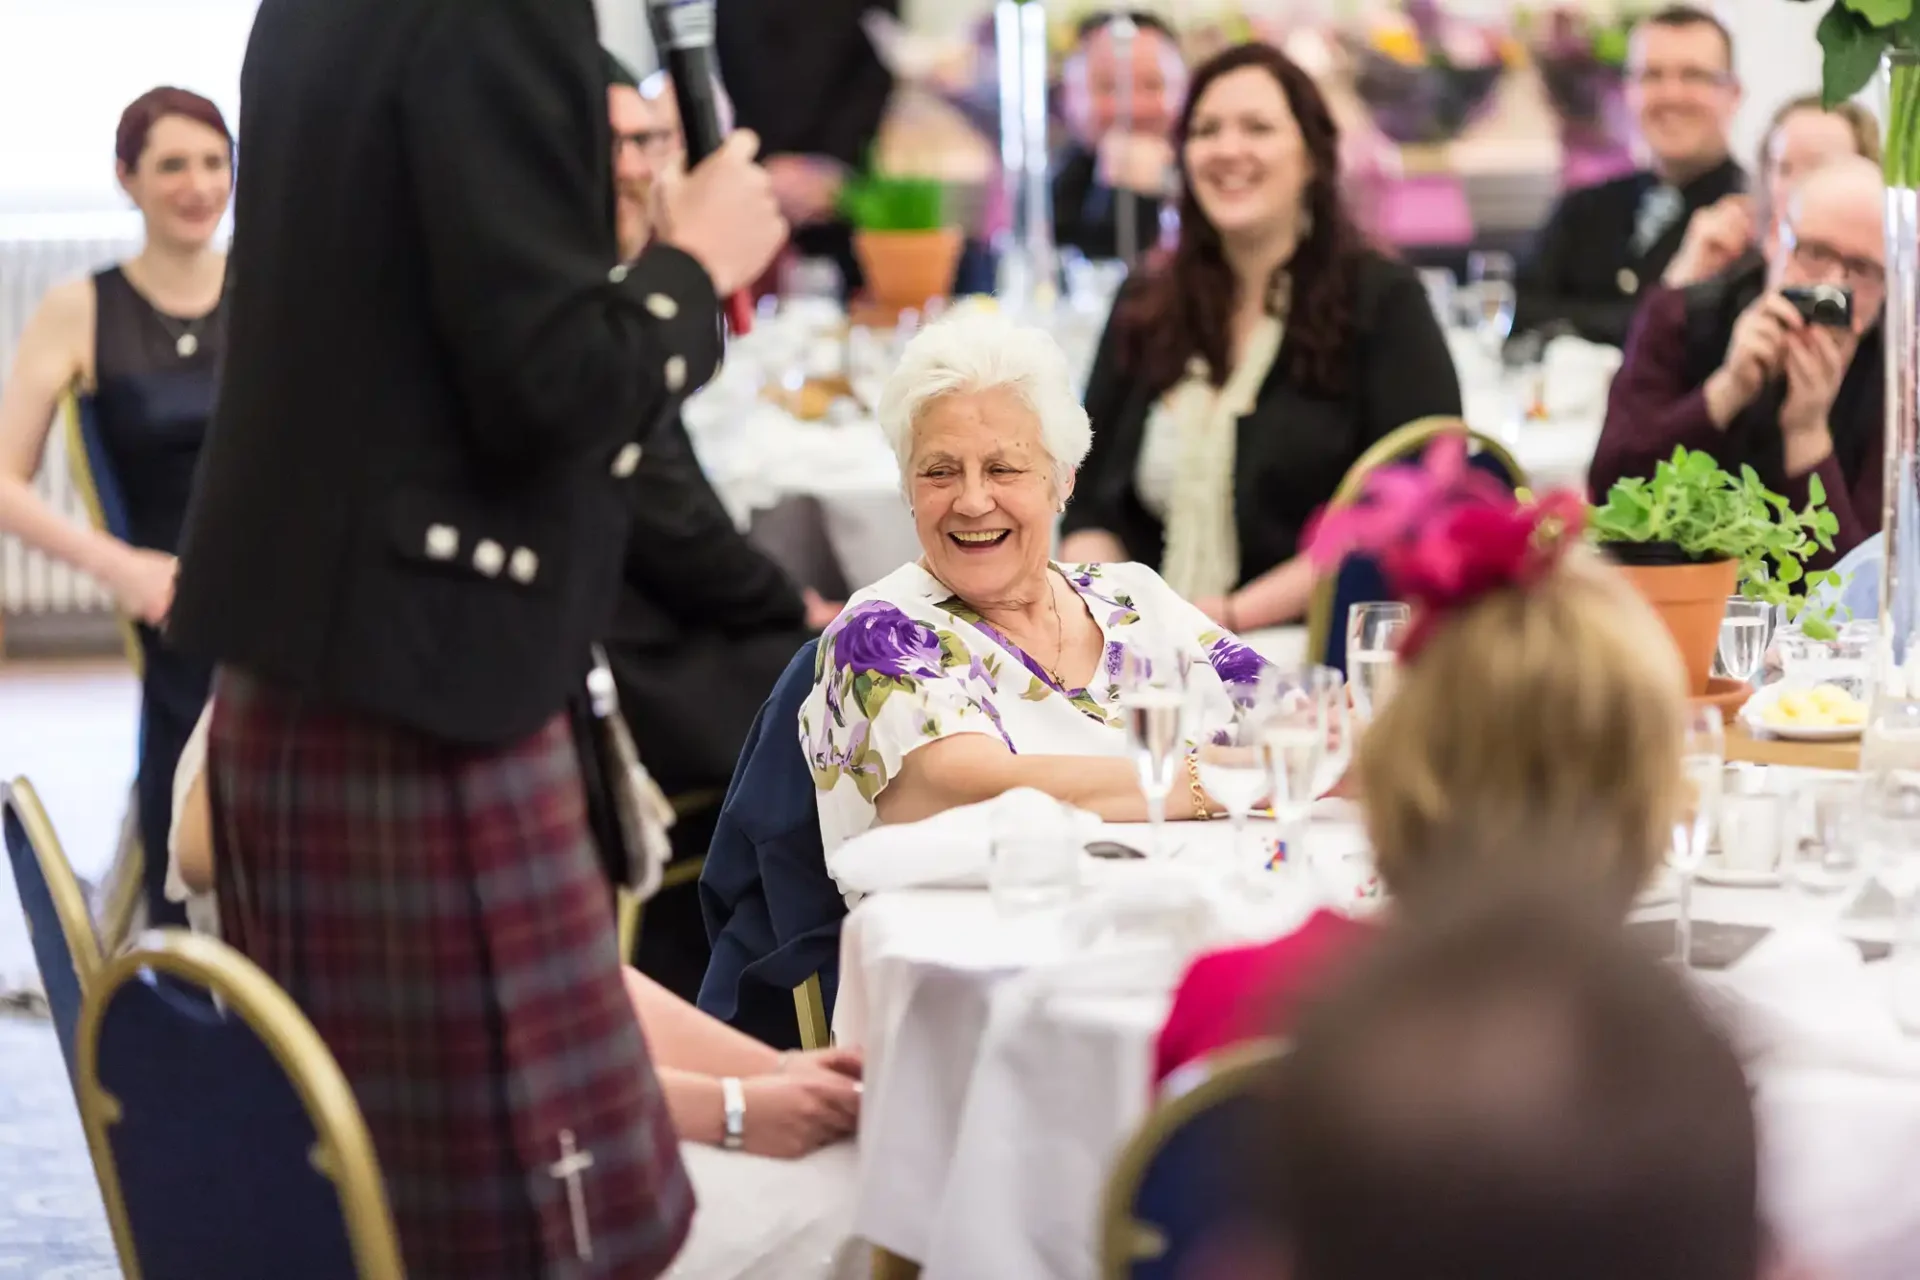 Elderly woman in a floral dress laughing joyfully at a table during a festive event with guests and a waiter in a kilt.